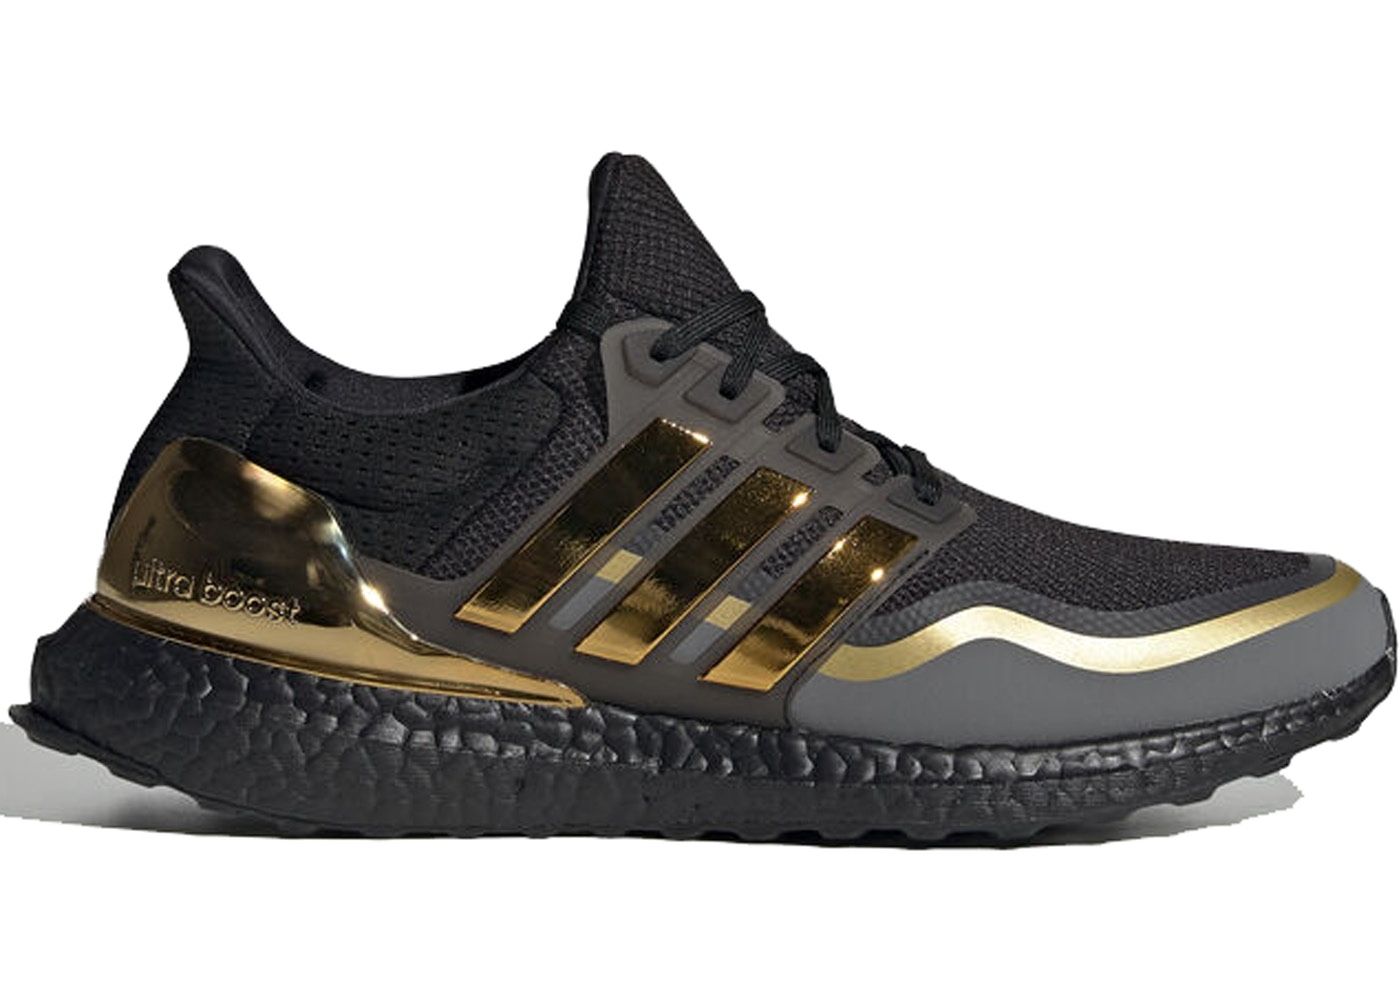 Adidas ultra boost gold colorway have size 8.5, 11, 11.5